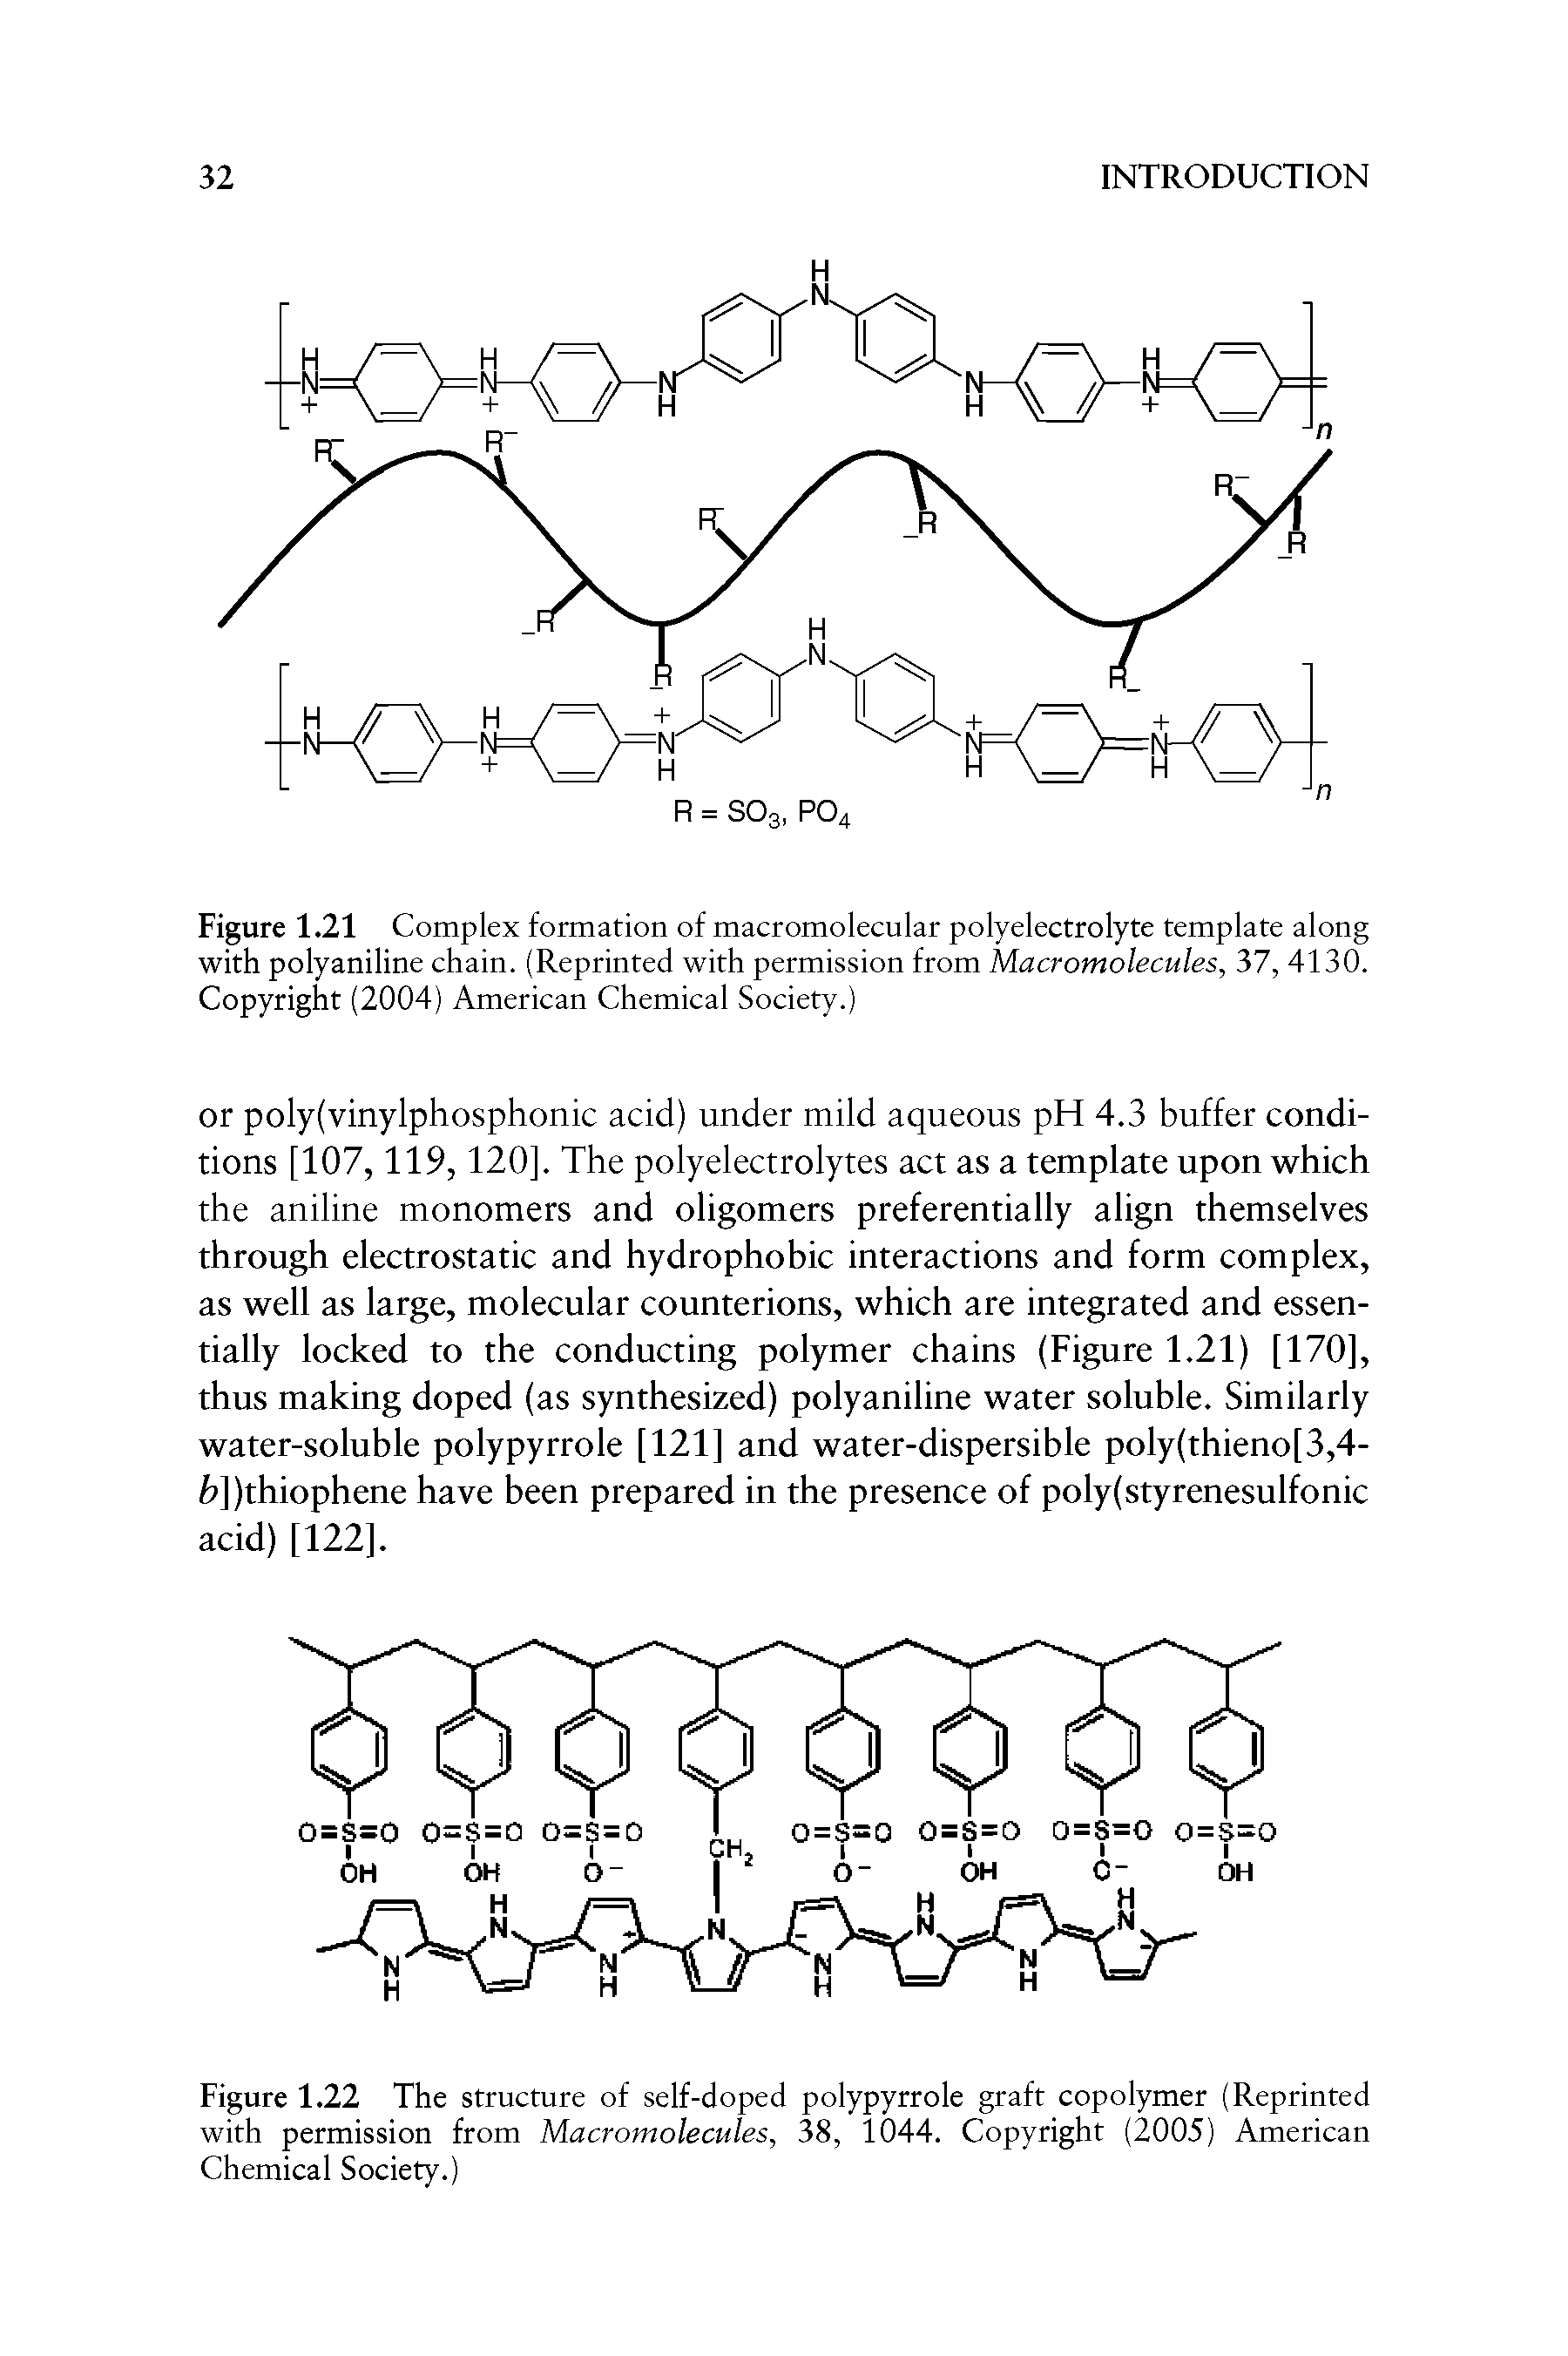 Figure 1.22 The structure of self-doped polypyrrole graft copolymer (Reprinted with permission from Macromolecules, 38, 1044. Copyright (2005) American Chemical Society.)...